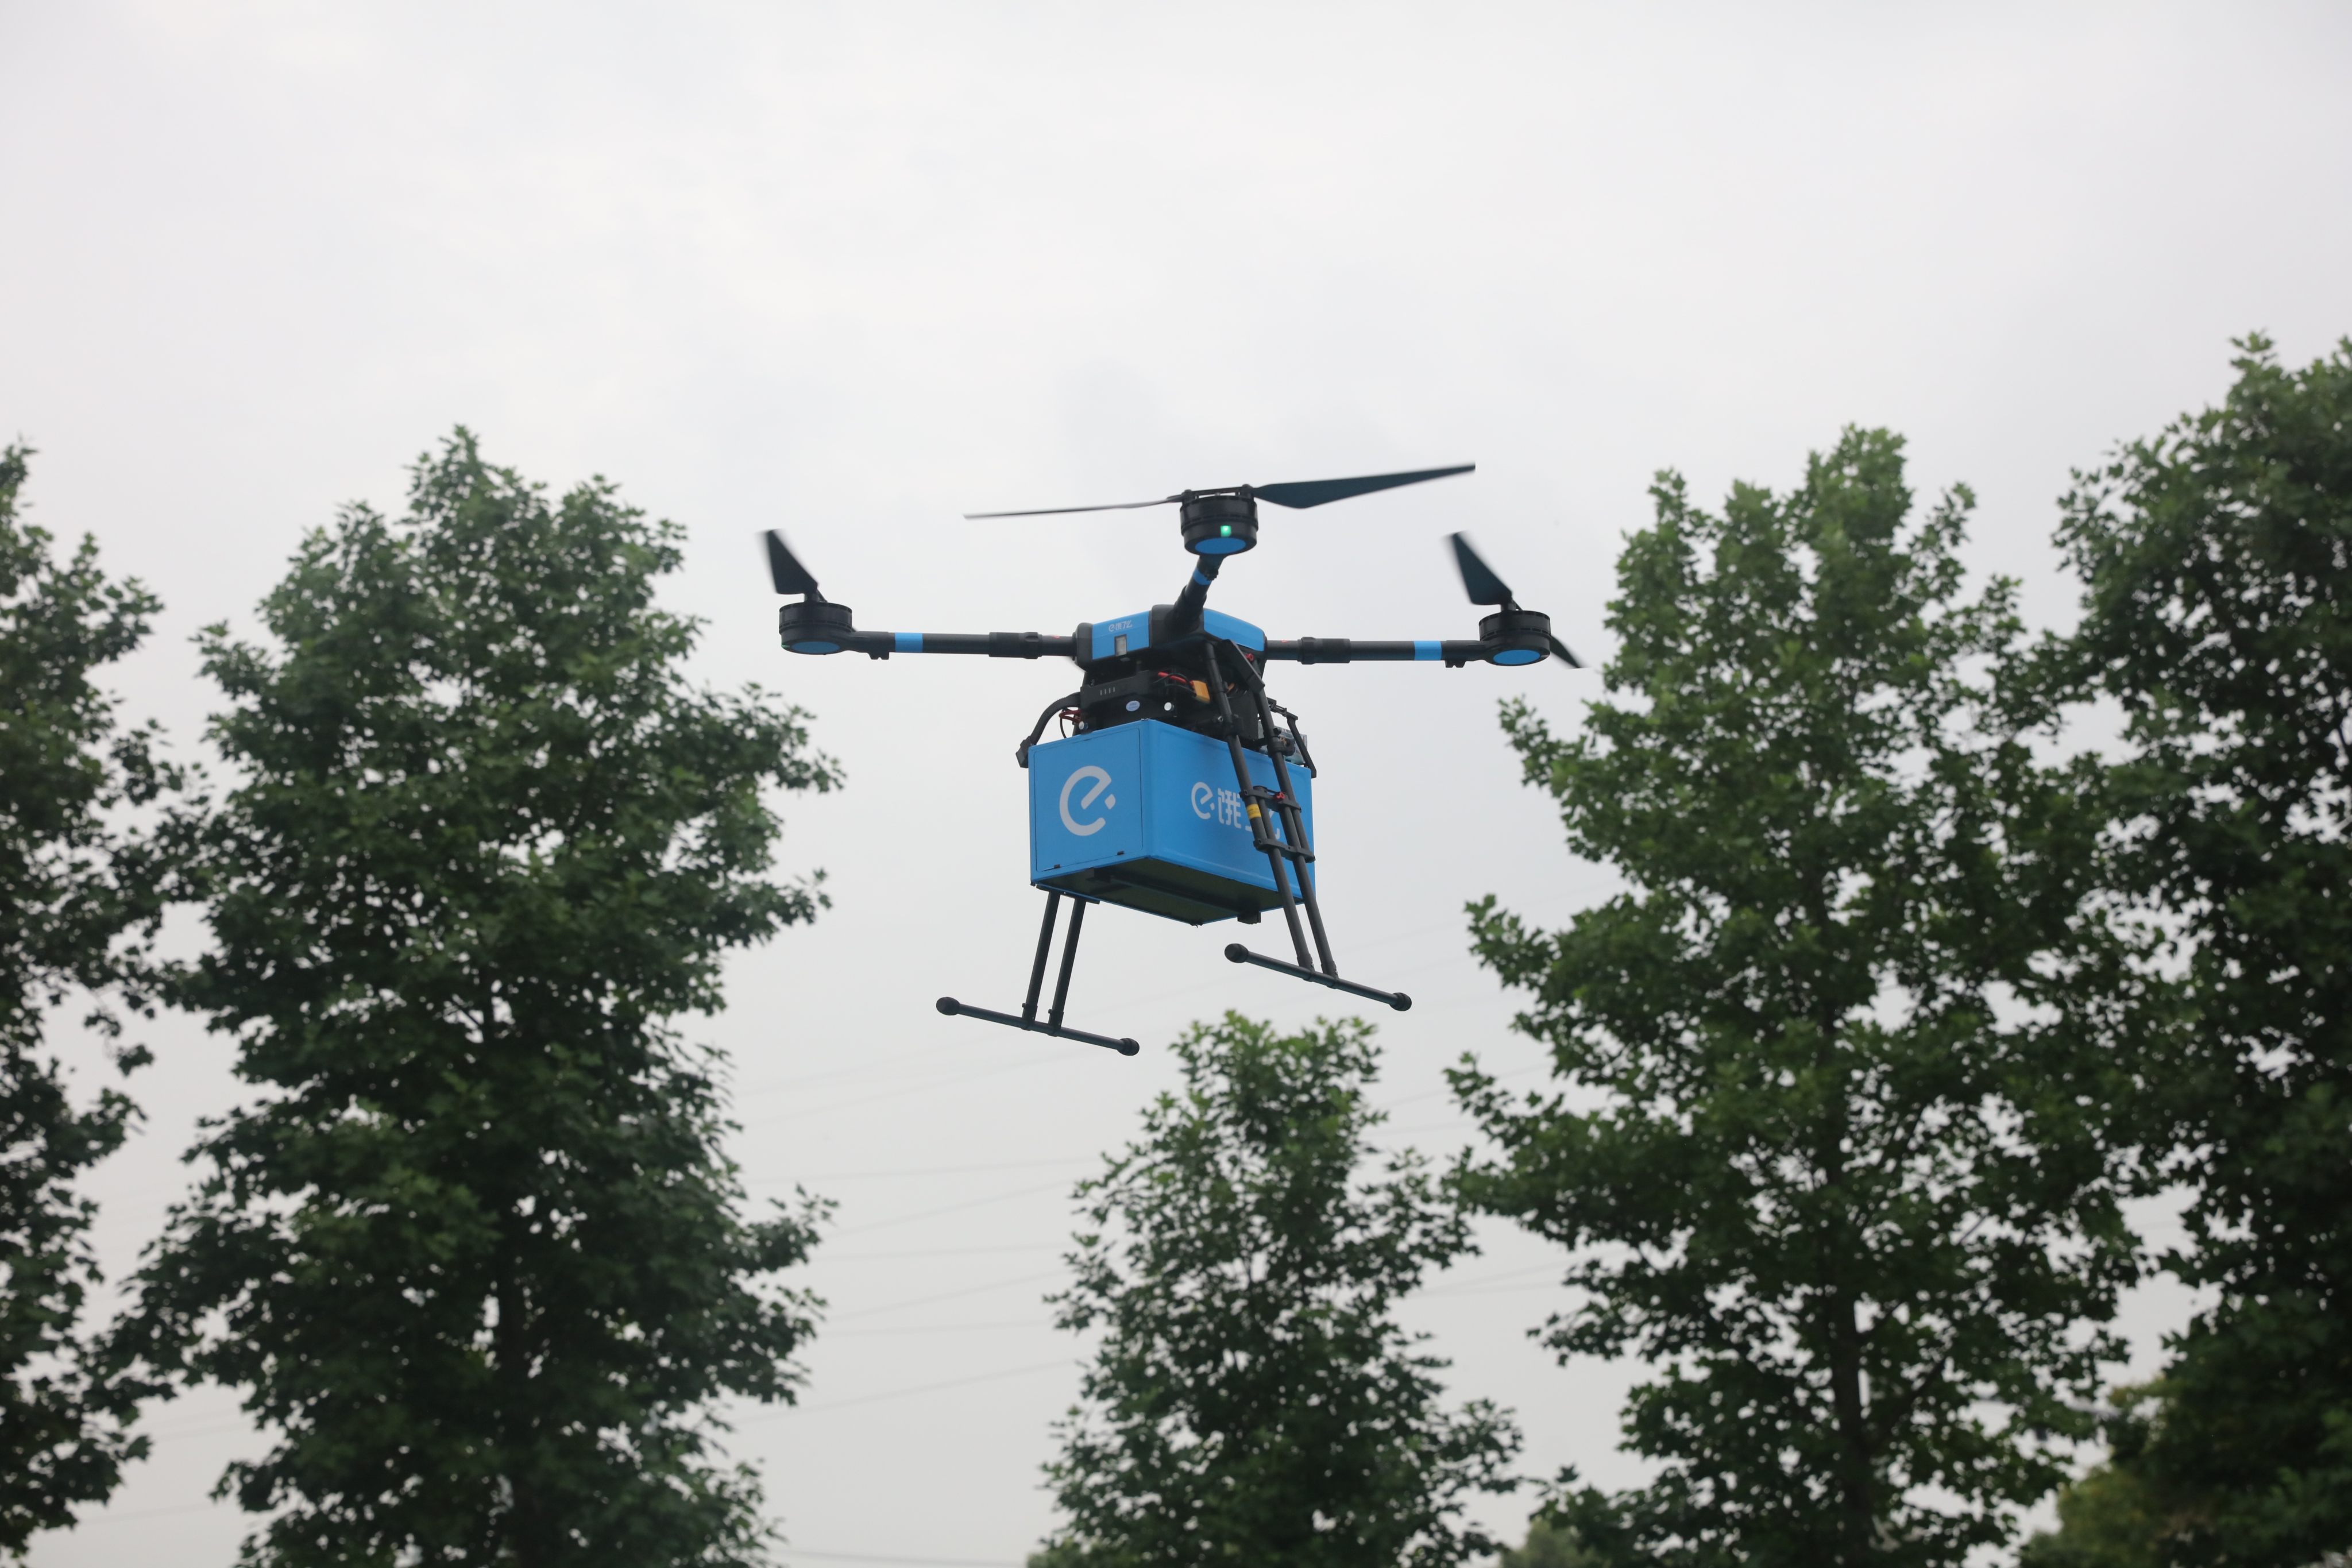 An undated photograph of a delivery drone bearing the livery of Ele.me, one of China’s leading online food delivery platforms, on 29 May 2018. Photo: Handout